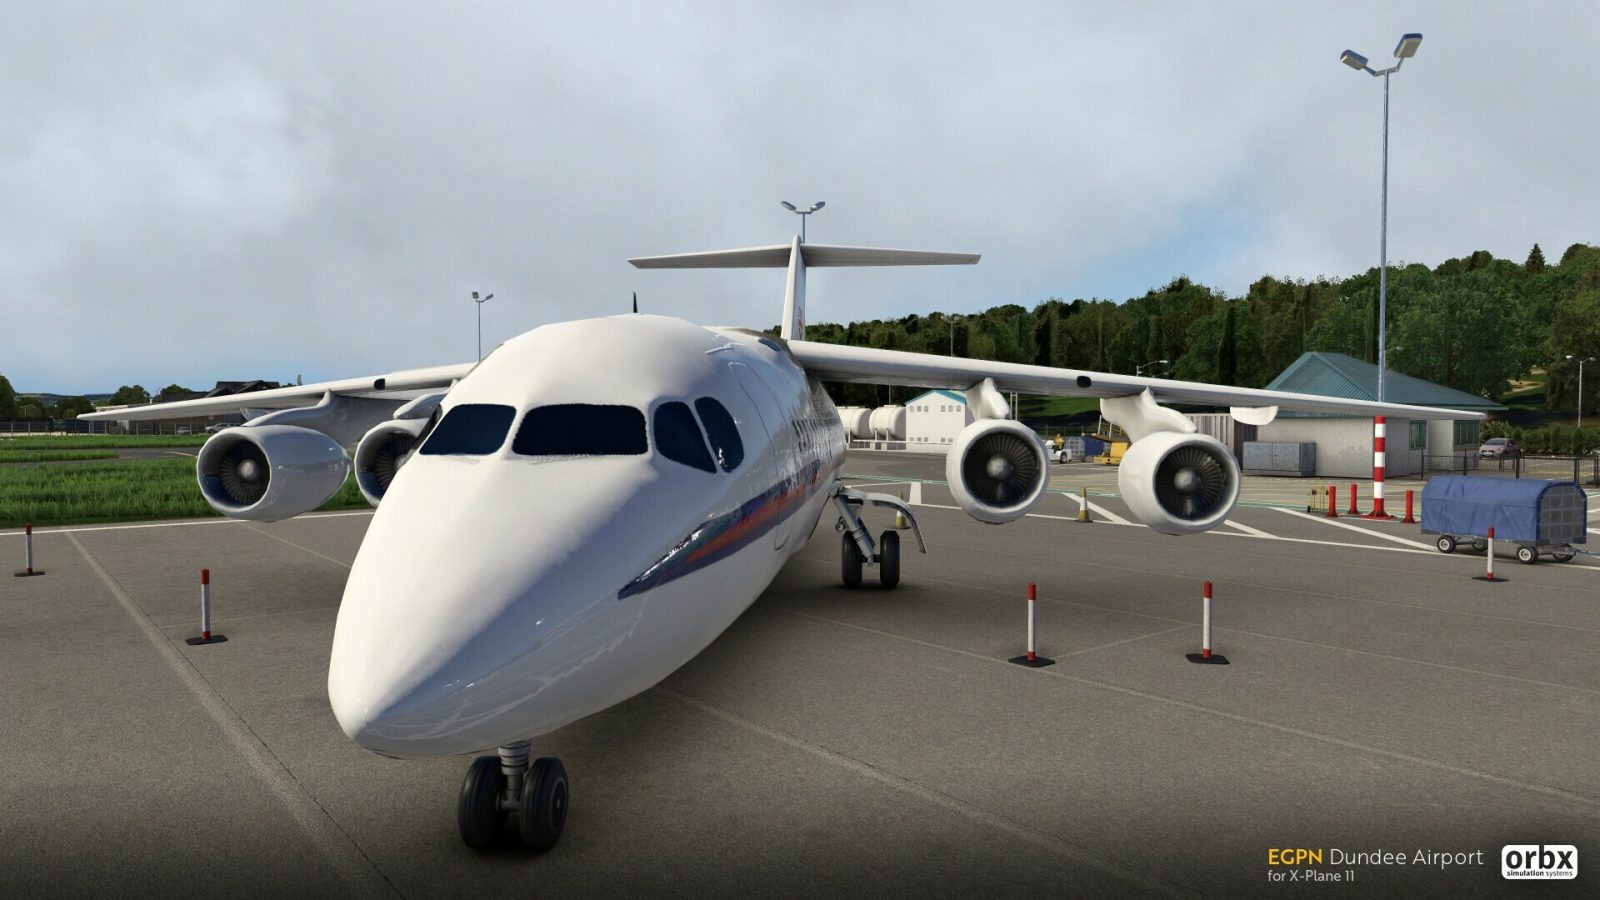 Orbx Dundee Airport-9456 